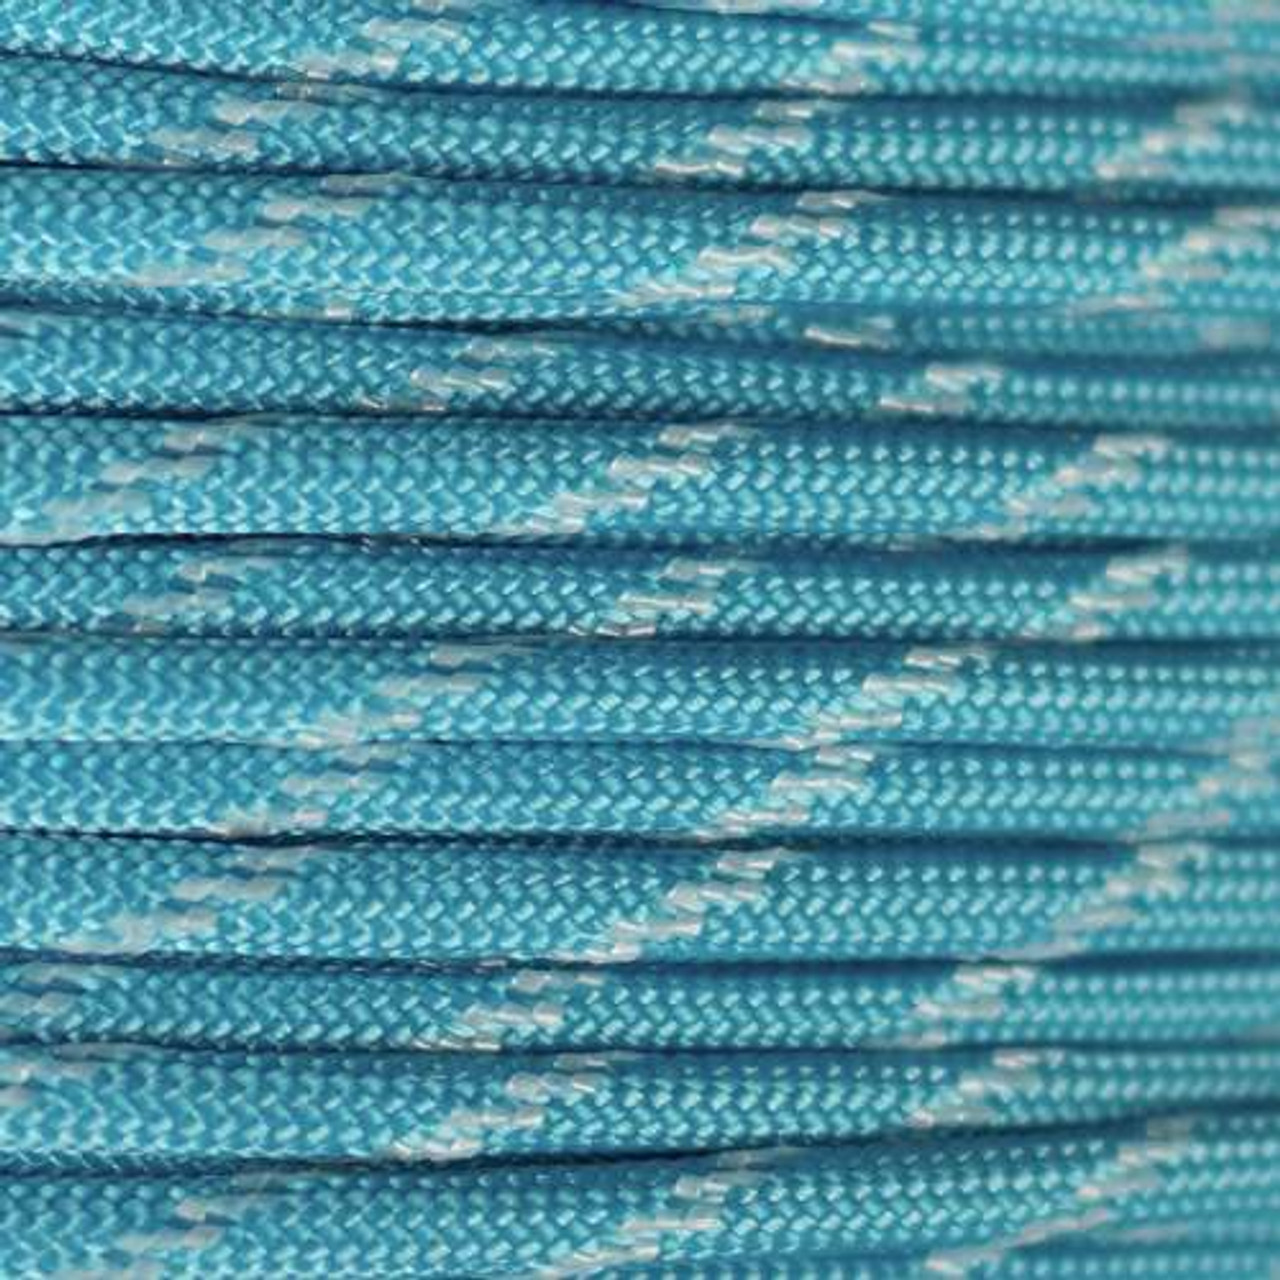 Dynamics Bedst politik Neon Turquoise 550 Paracord with Glow in the Dark Tracers | Outdoor Bunker